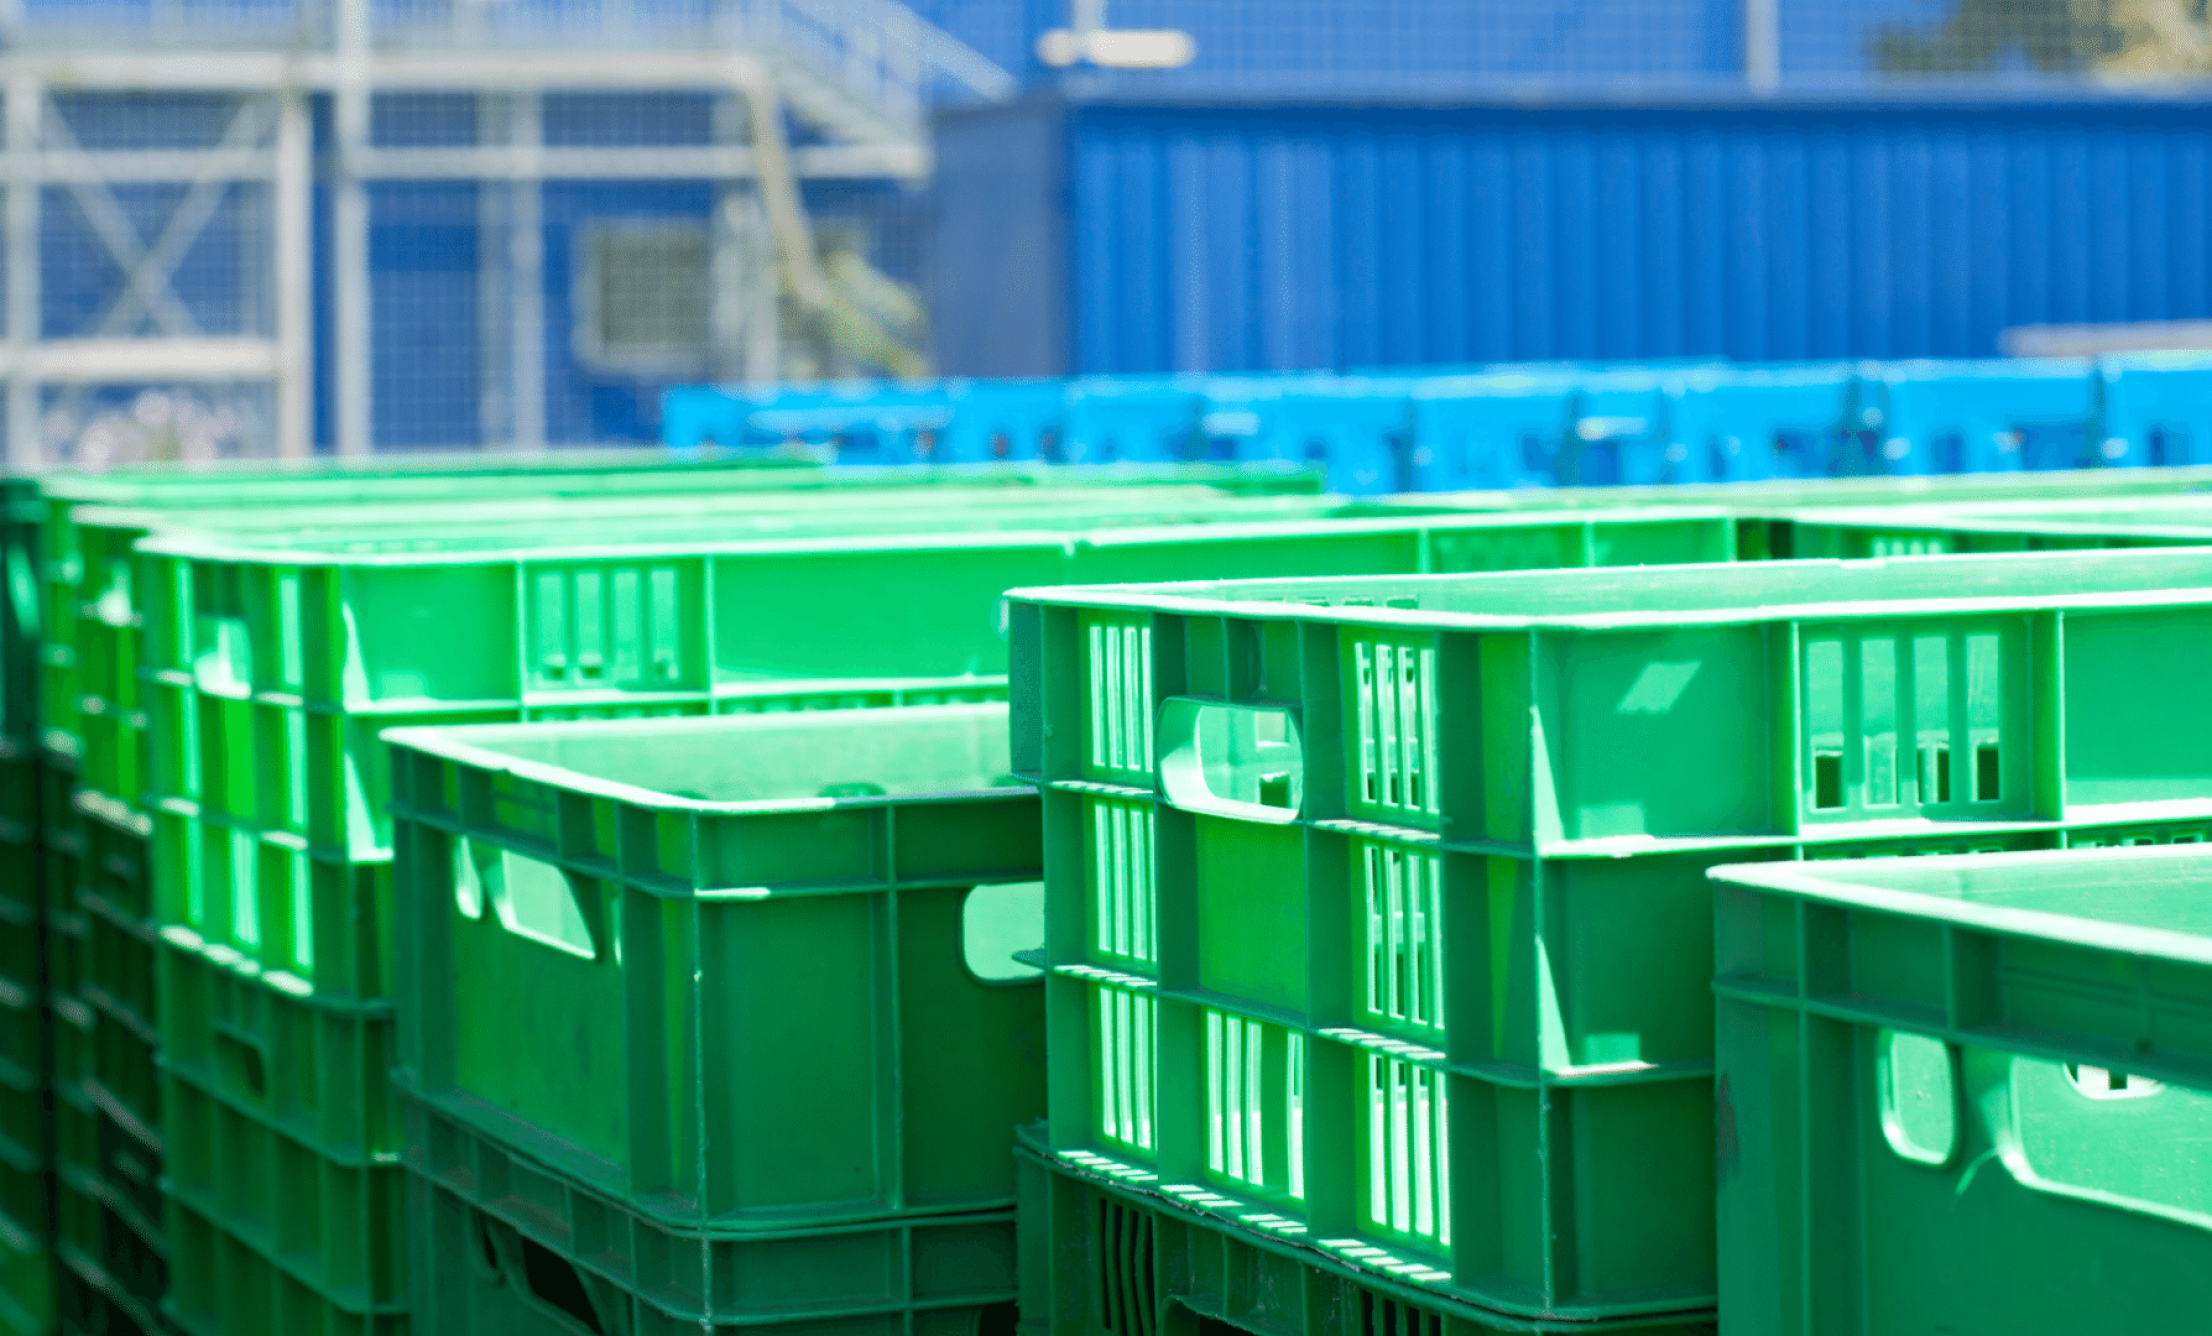 What is the contribution of plastic crates to saving costs?